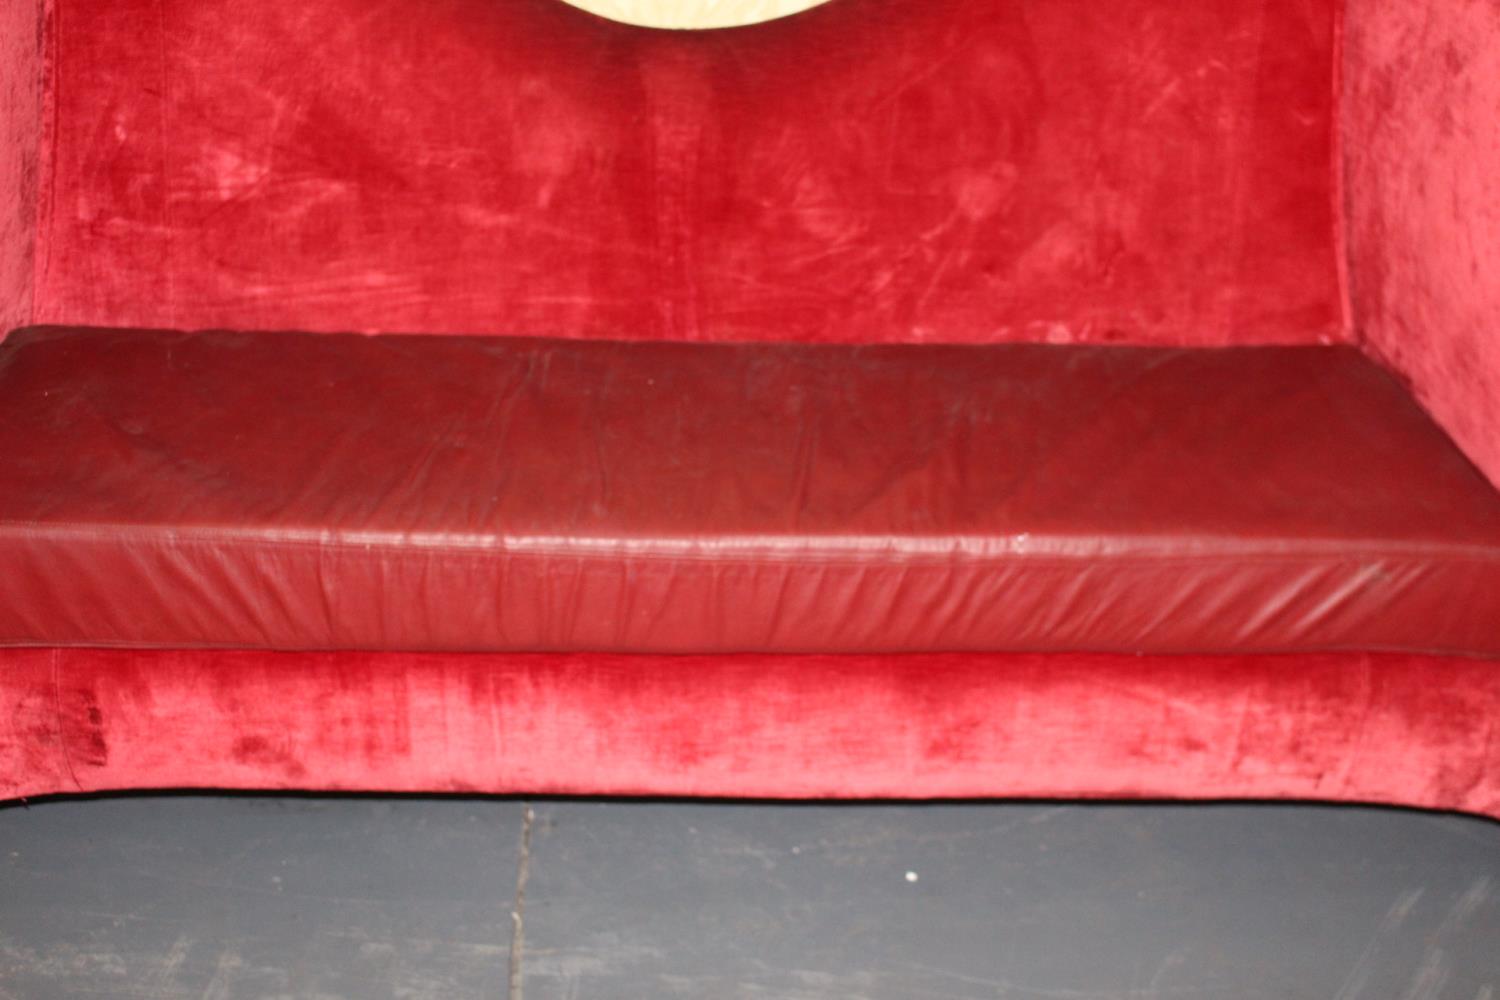 Nightclub couch - Image 2 of 2